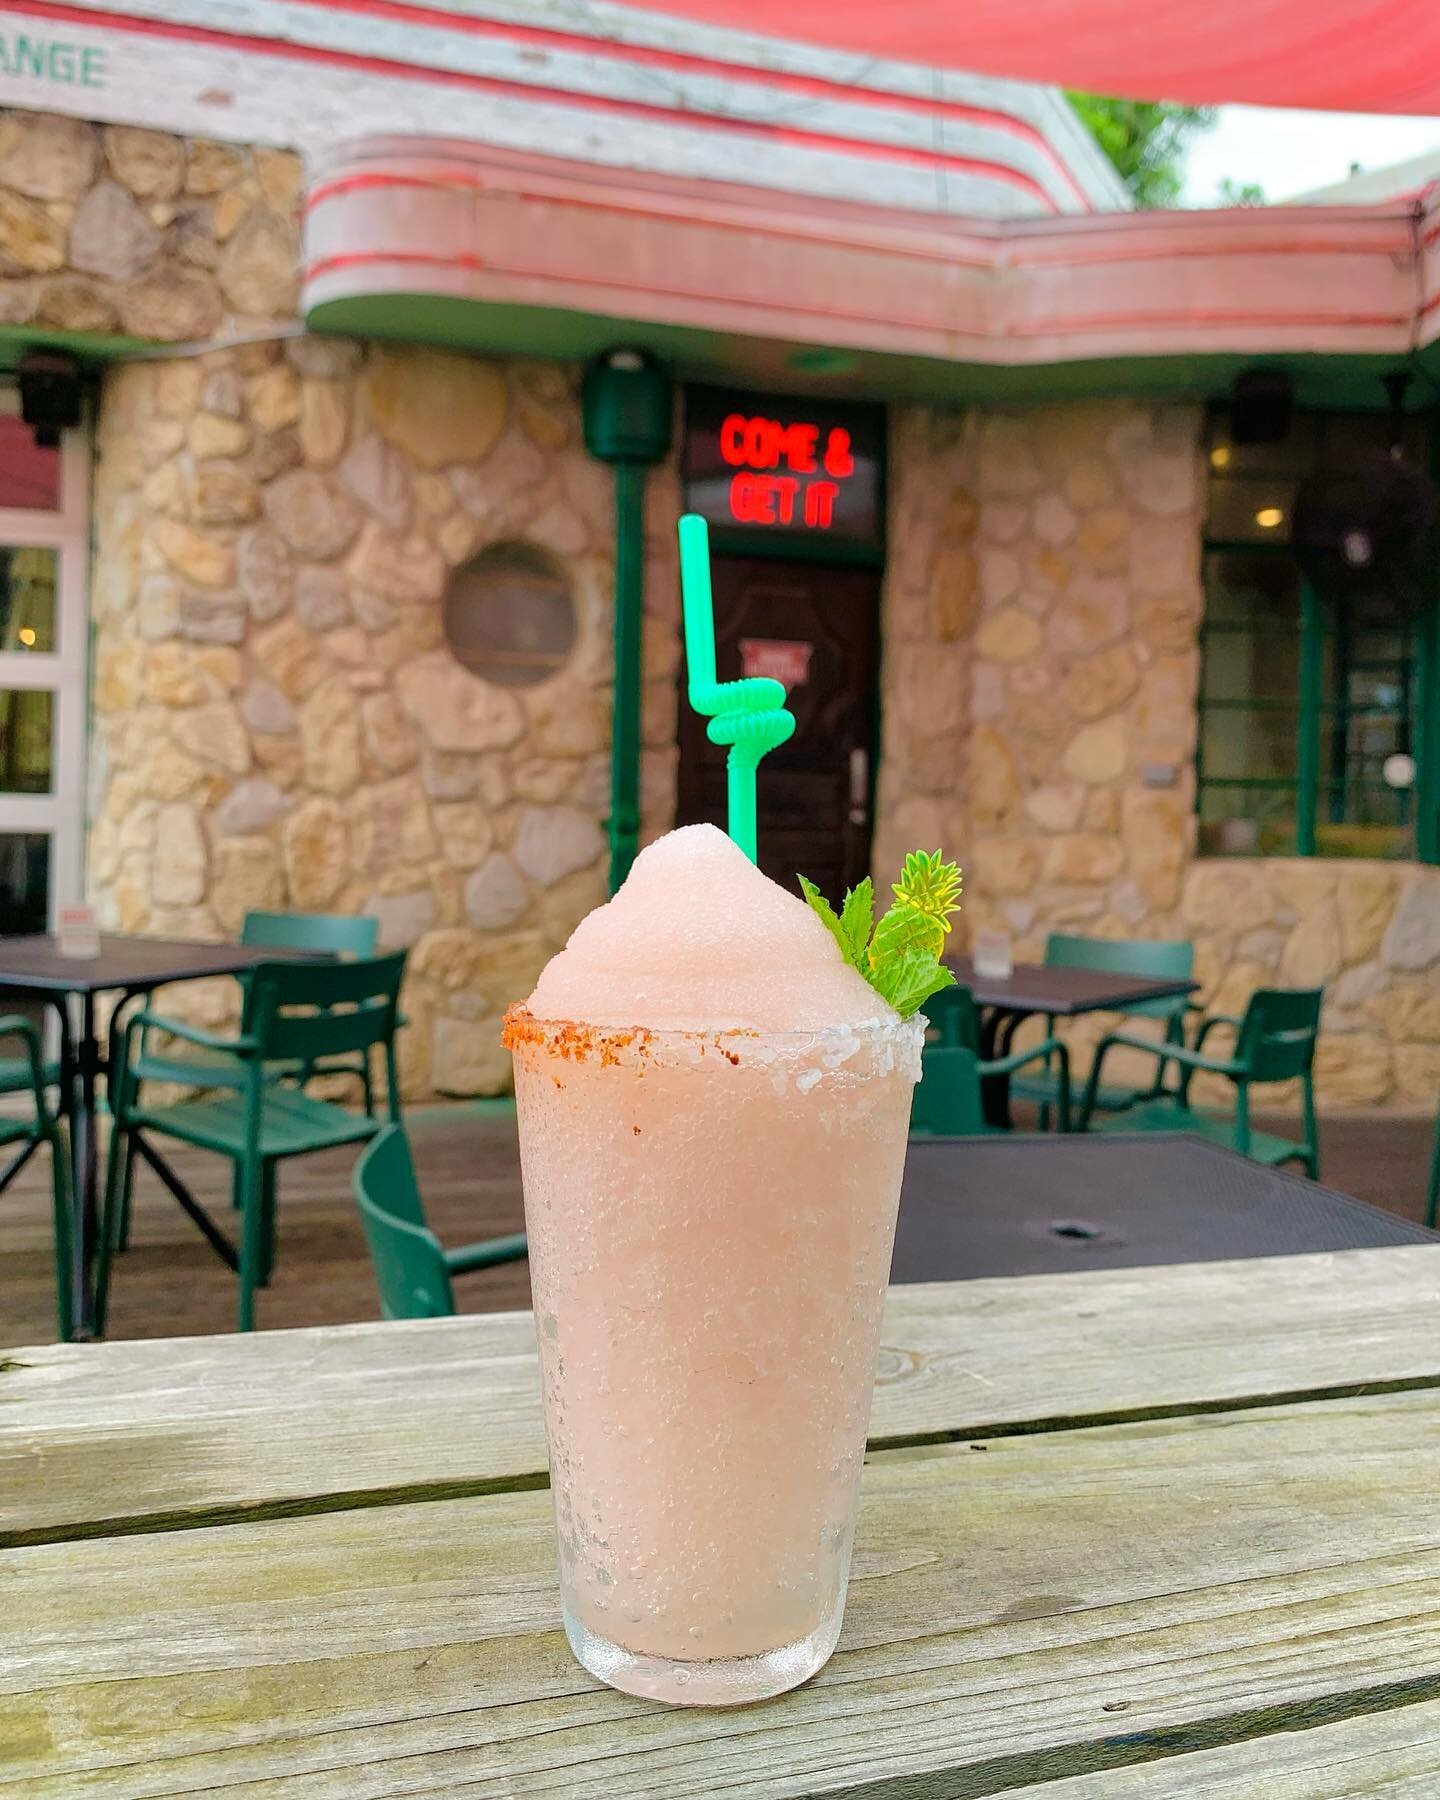 We&rsquo;ve been preparing for sunnier weather, which means we have Frozen Corvette Summers on deck! The perfect mix of rum, watermelon, pineapple, mint, lemon, and lime is waiting for you, so come and get it! #summertime #drinkspecial #watermelon #t